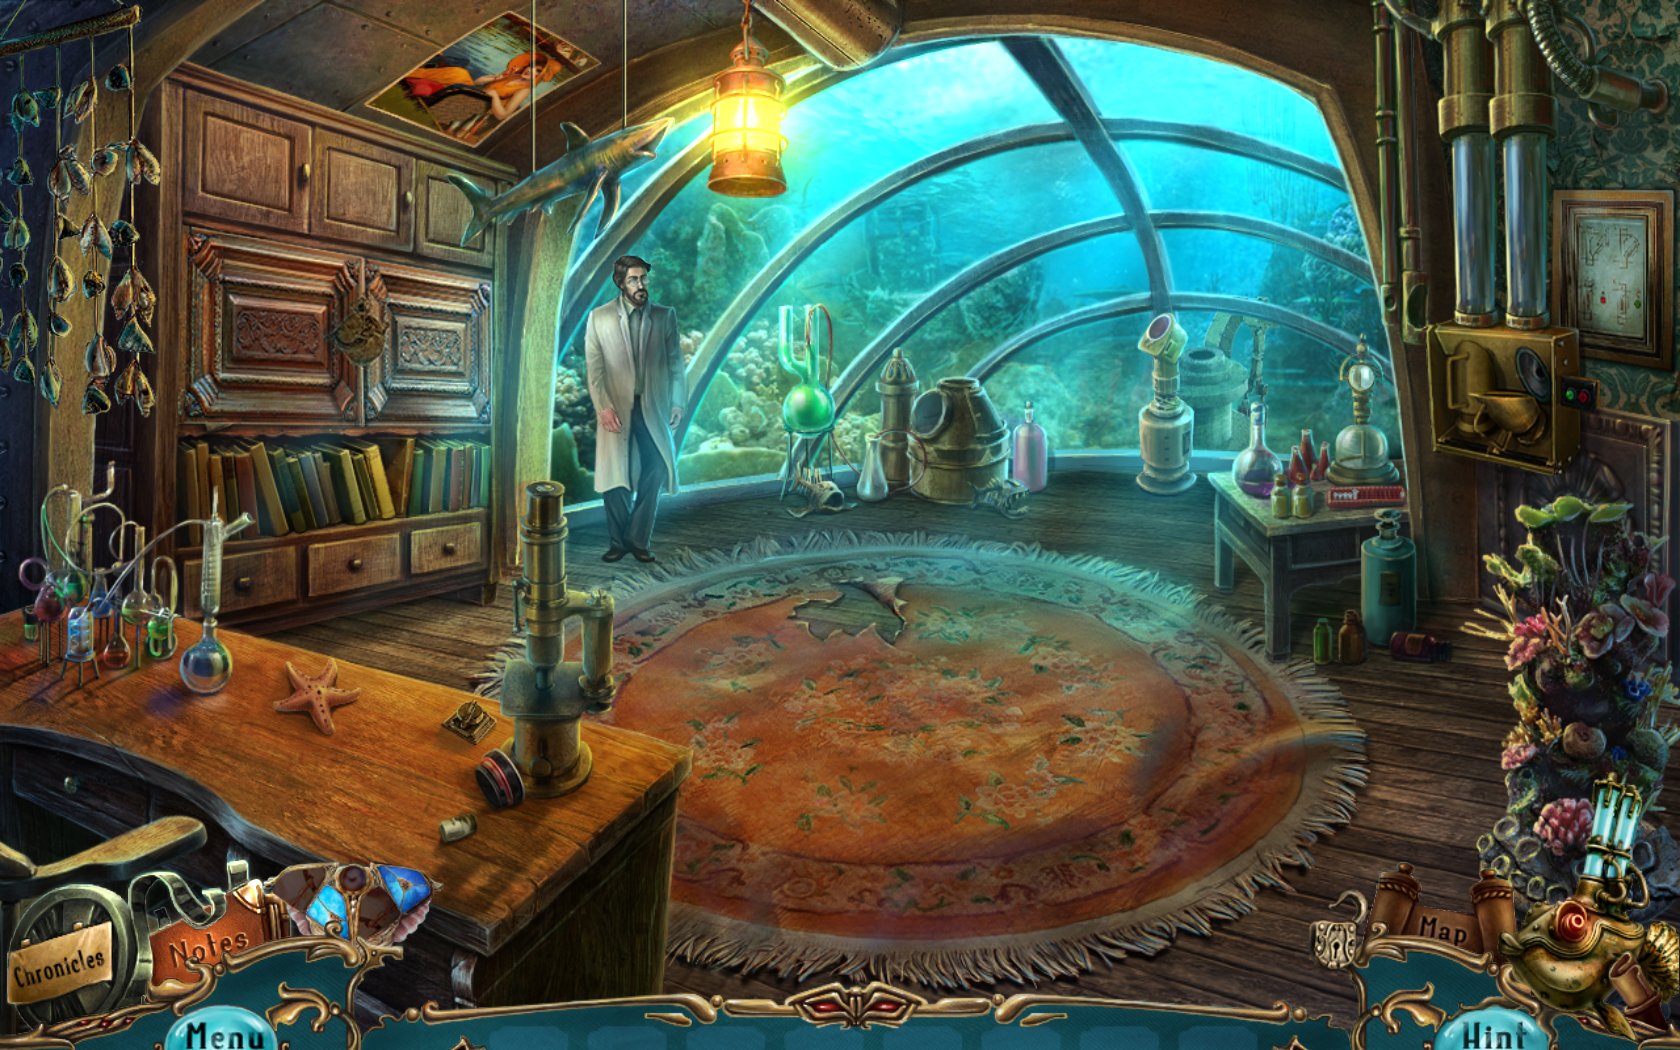 amber-s-tales-the-isle-of-dead-ships-2014-game-details-adventure-gamers